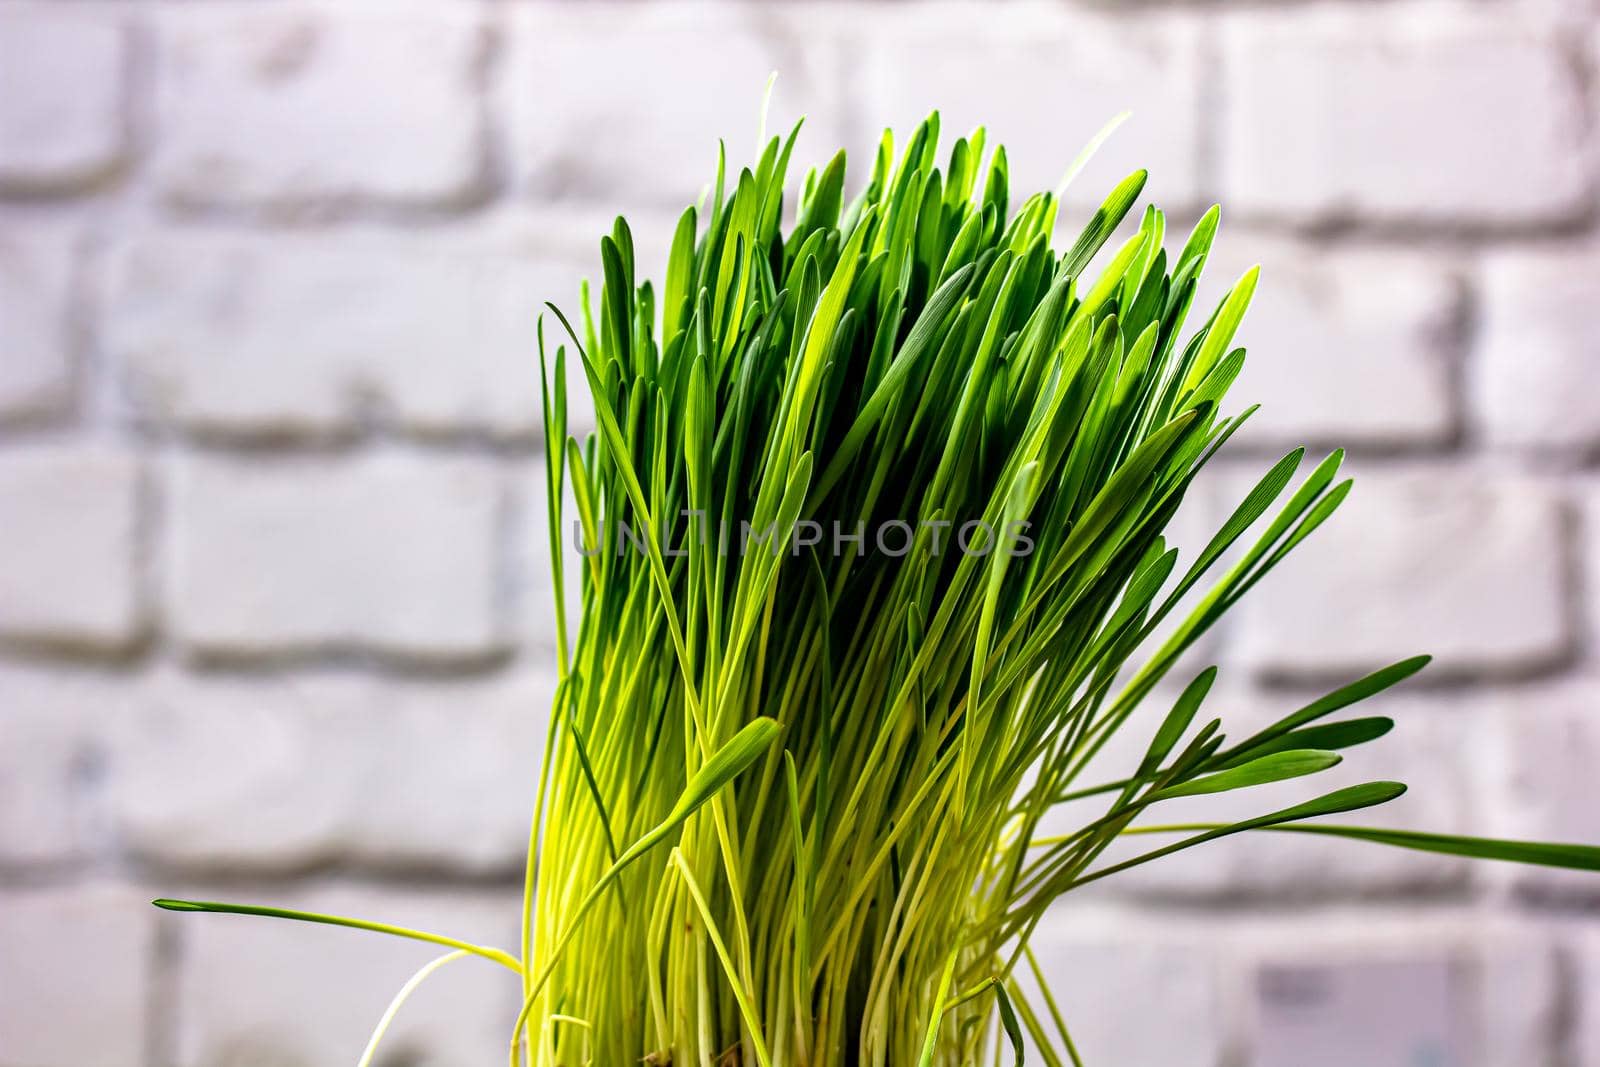 Green cat grass with dew drops grows in a ceramic flower pot in macro. Oat grass plant in terracotta pot. Selective focus on individual blades of grass. Blurred image by Milanchikov